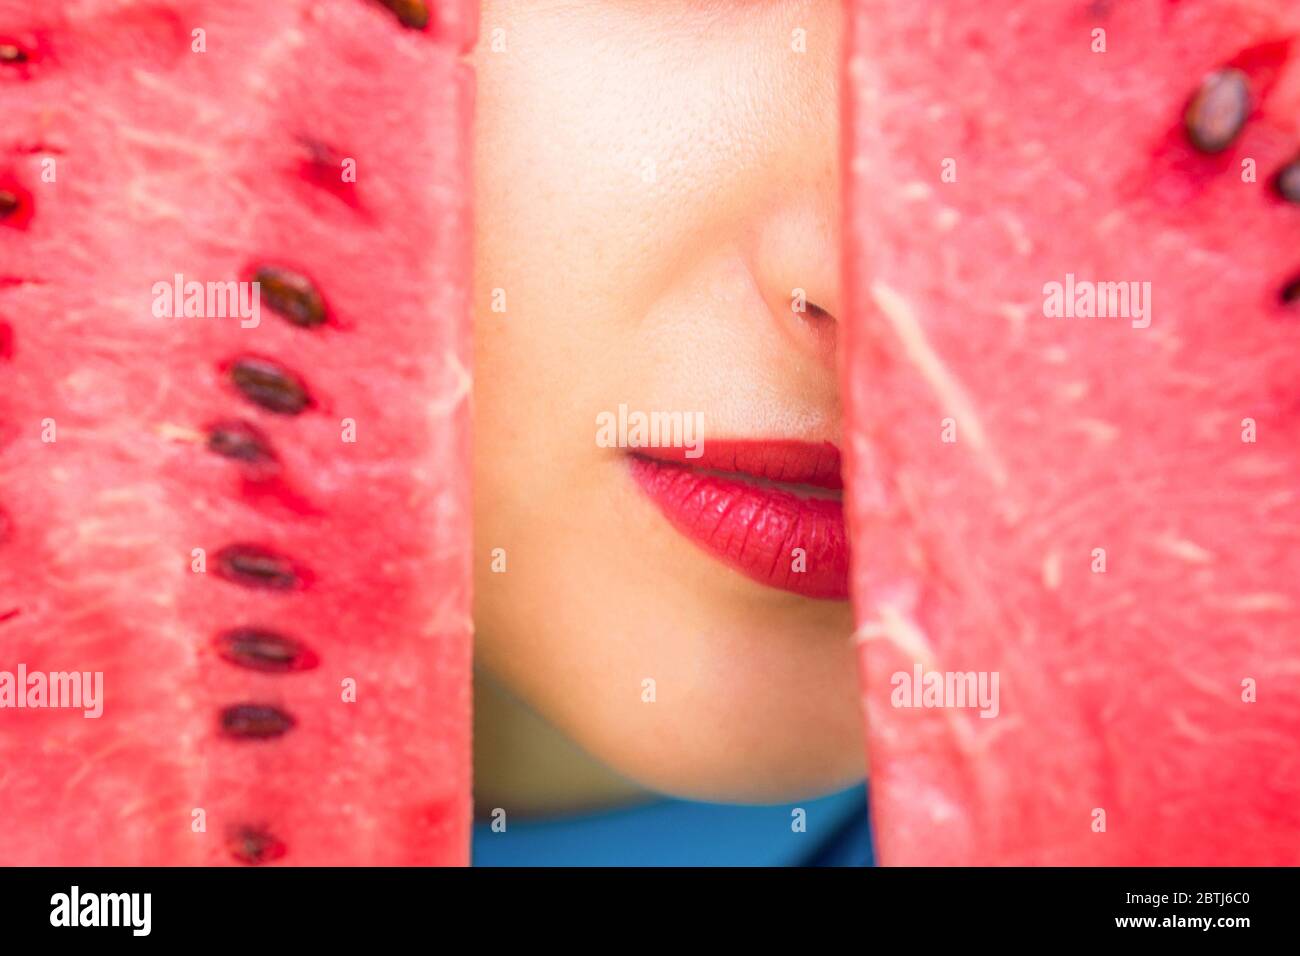 Close Up Of Young Woman Covering Her Face Between Two Pieces Of Watermelon Peeking Lips With Red 